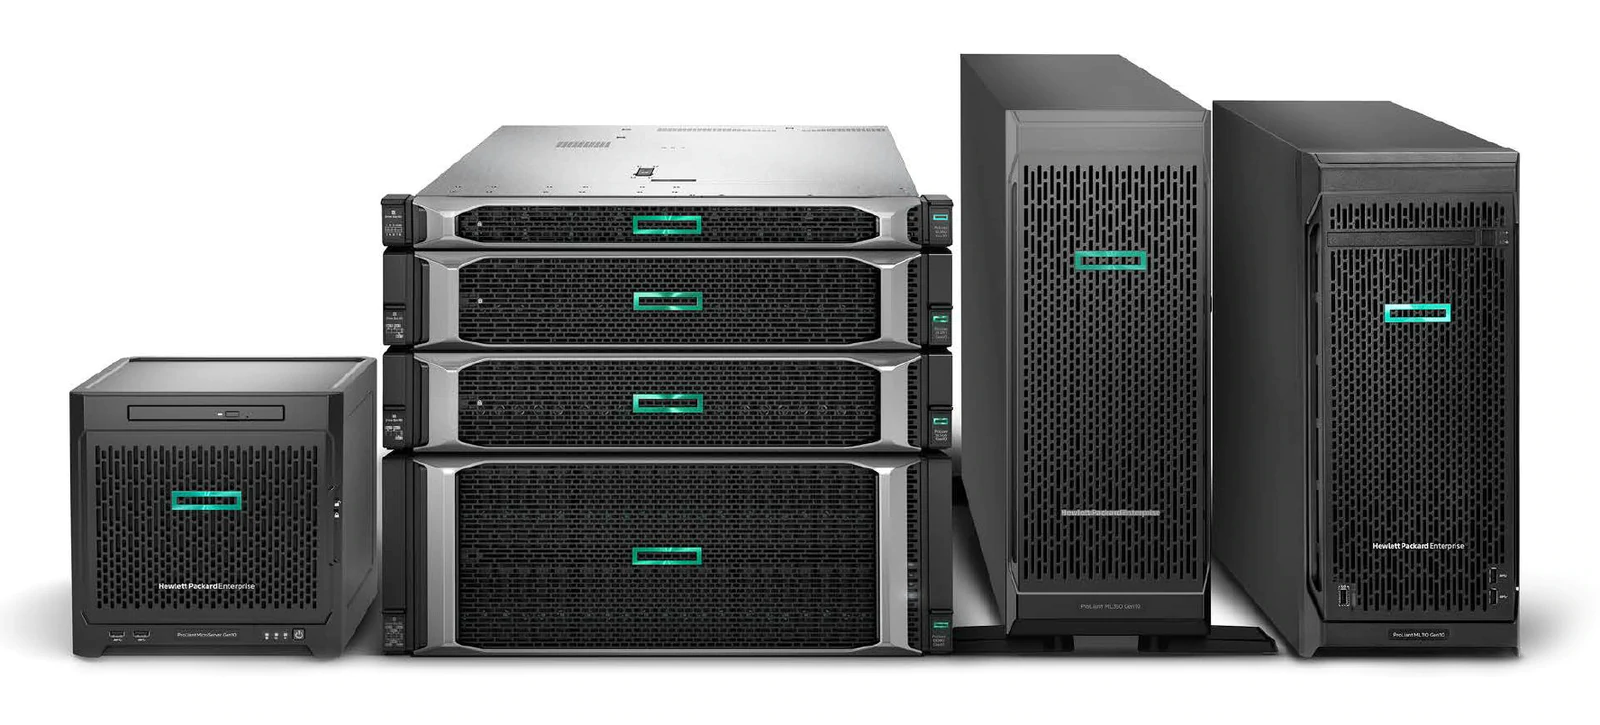 Buy a new business server by Emerald City IT (Featuring Hewlet Packard, IBM Lenovo, or Dell Chassis)